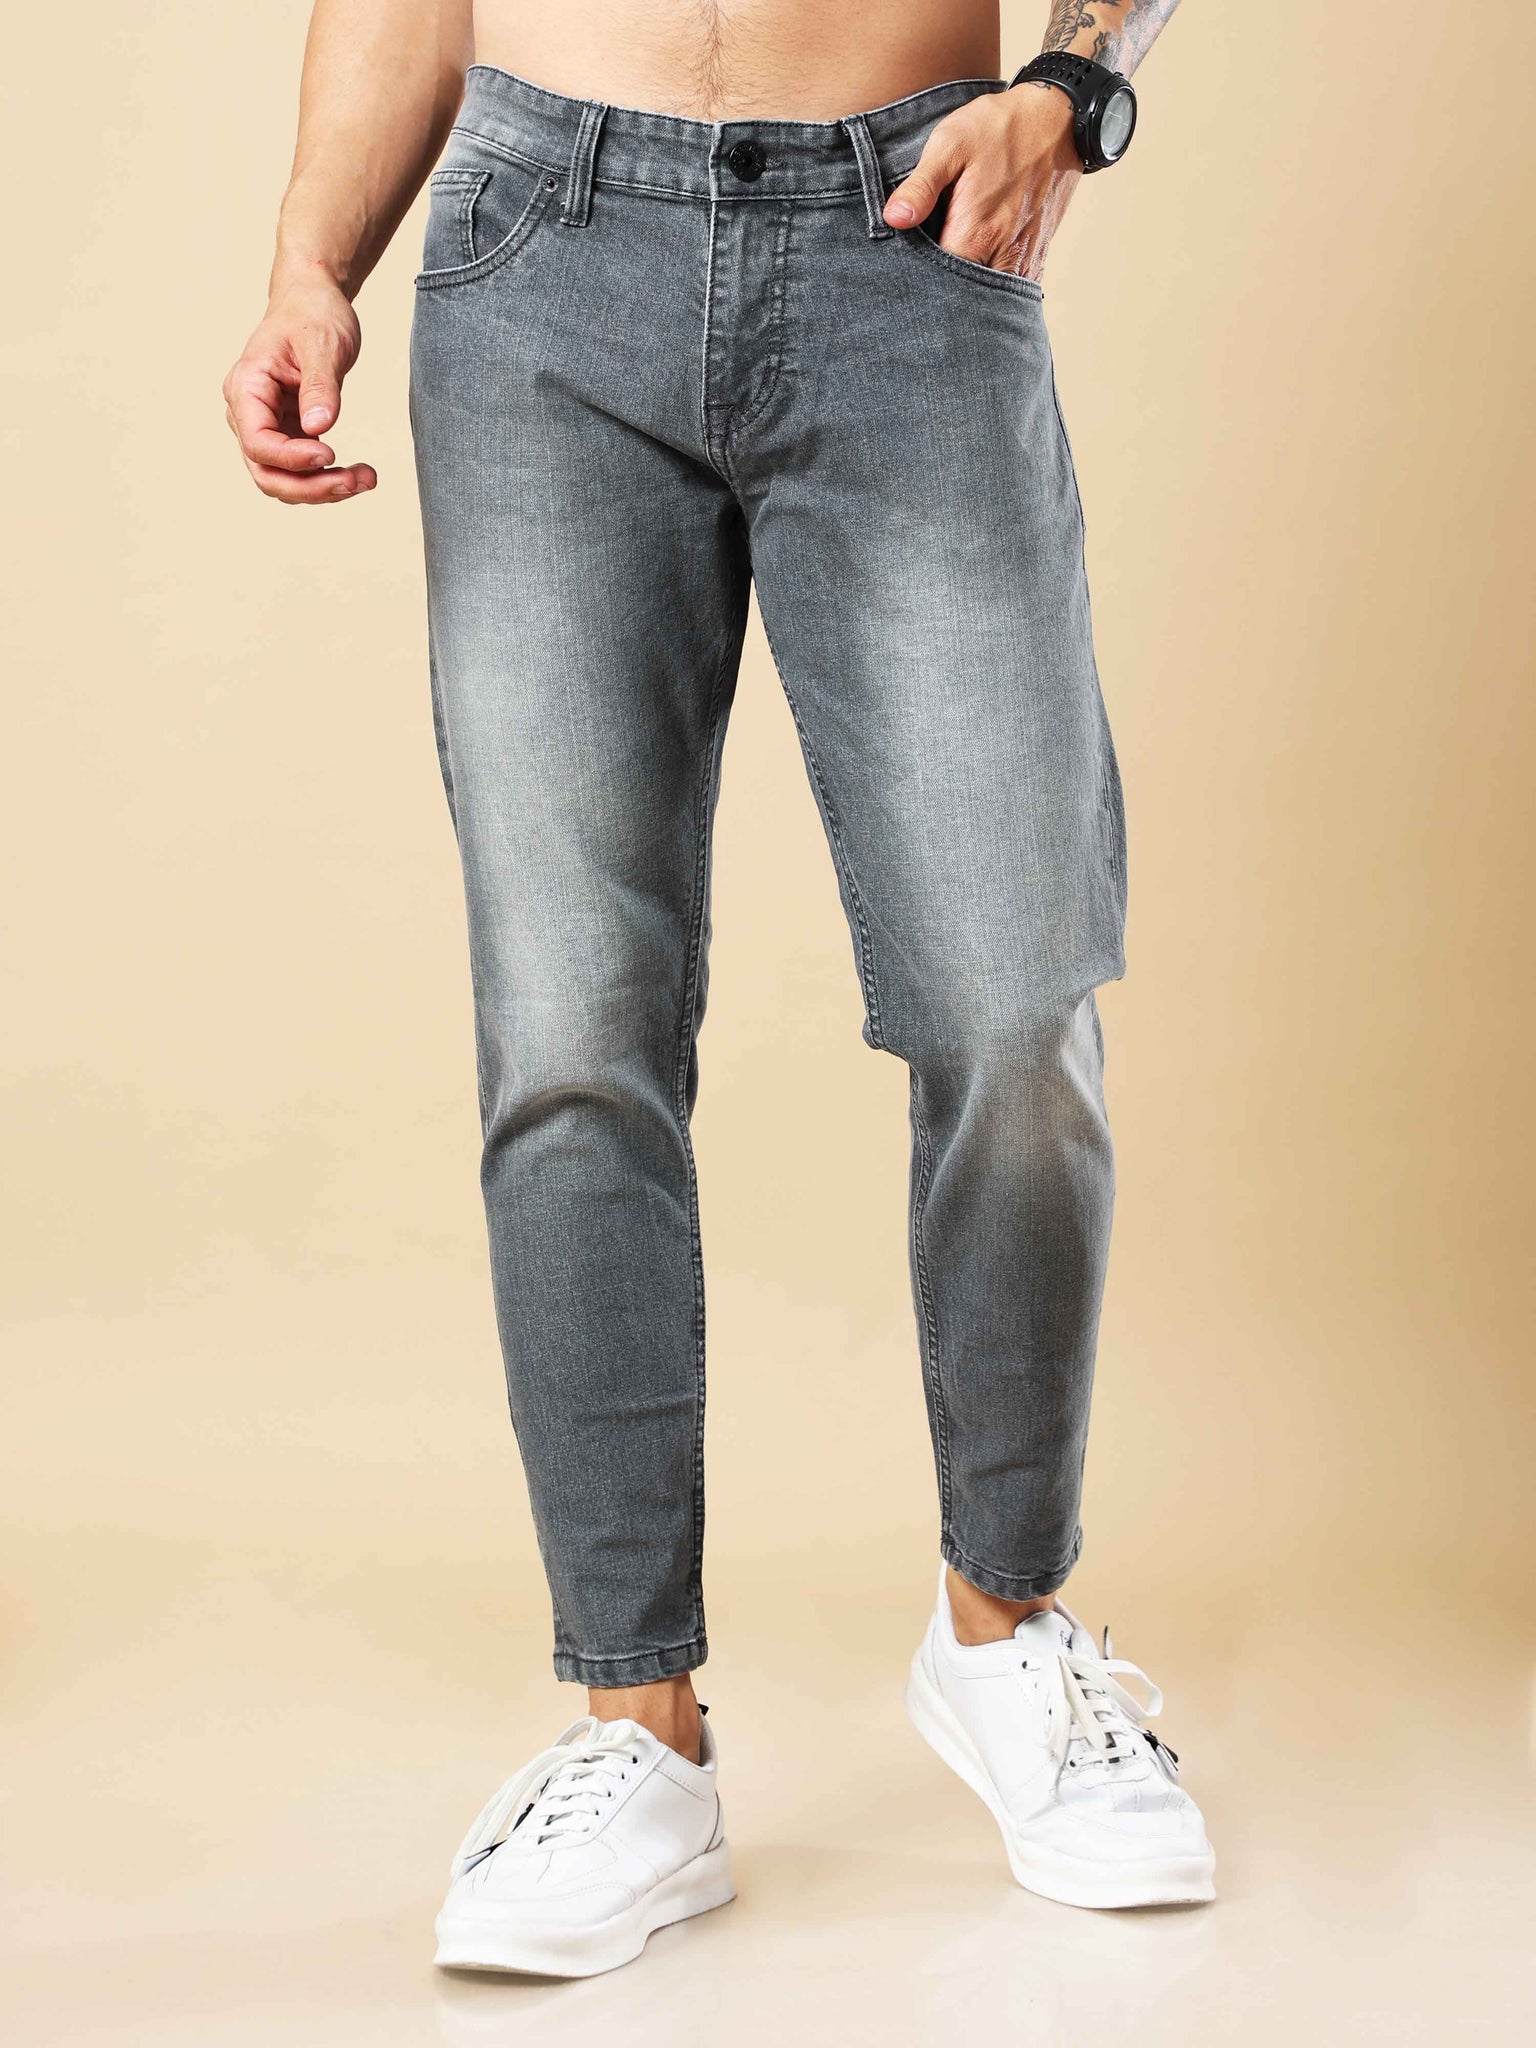 Cannon Ball Gray Skinny Jeans